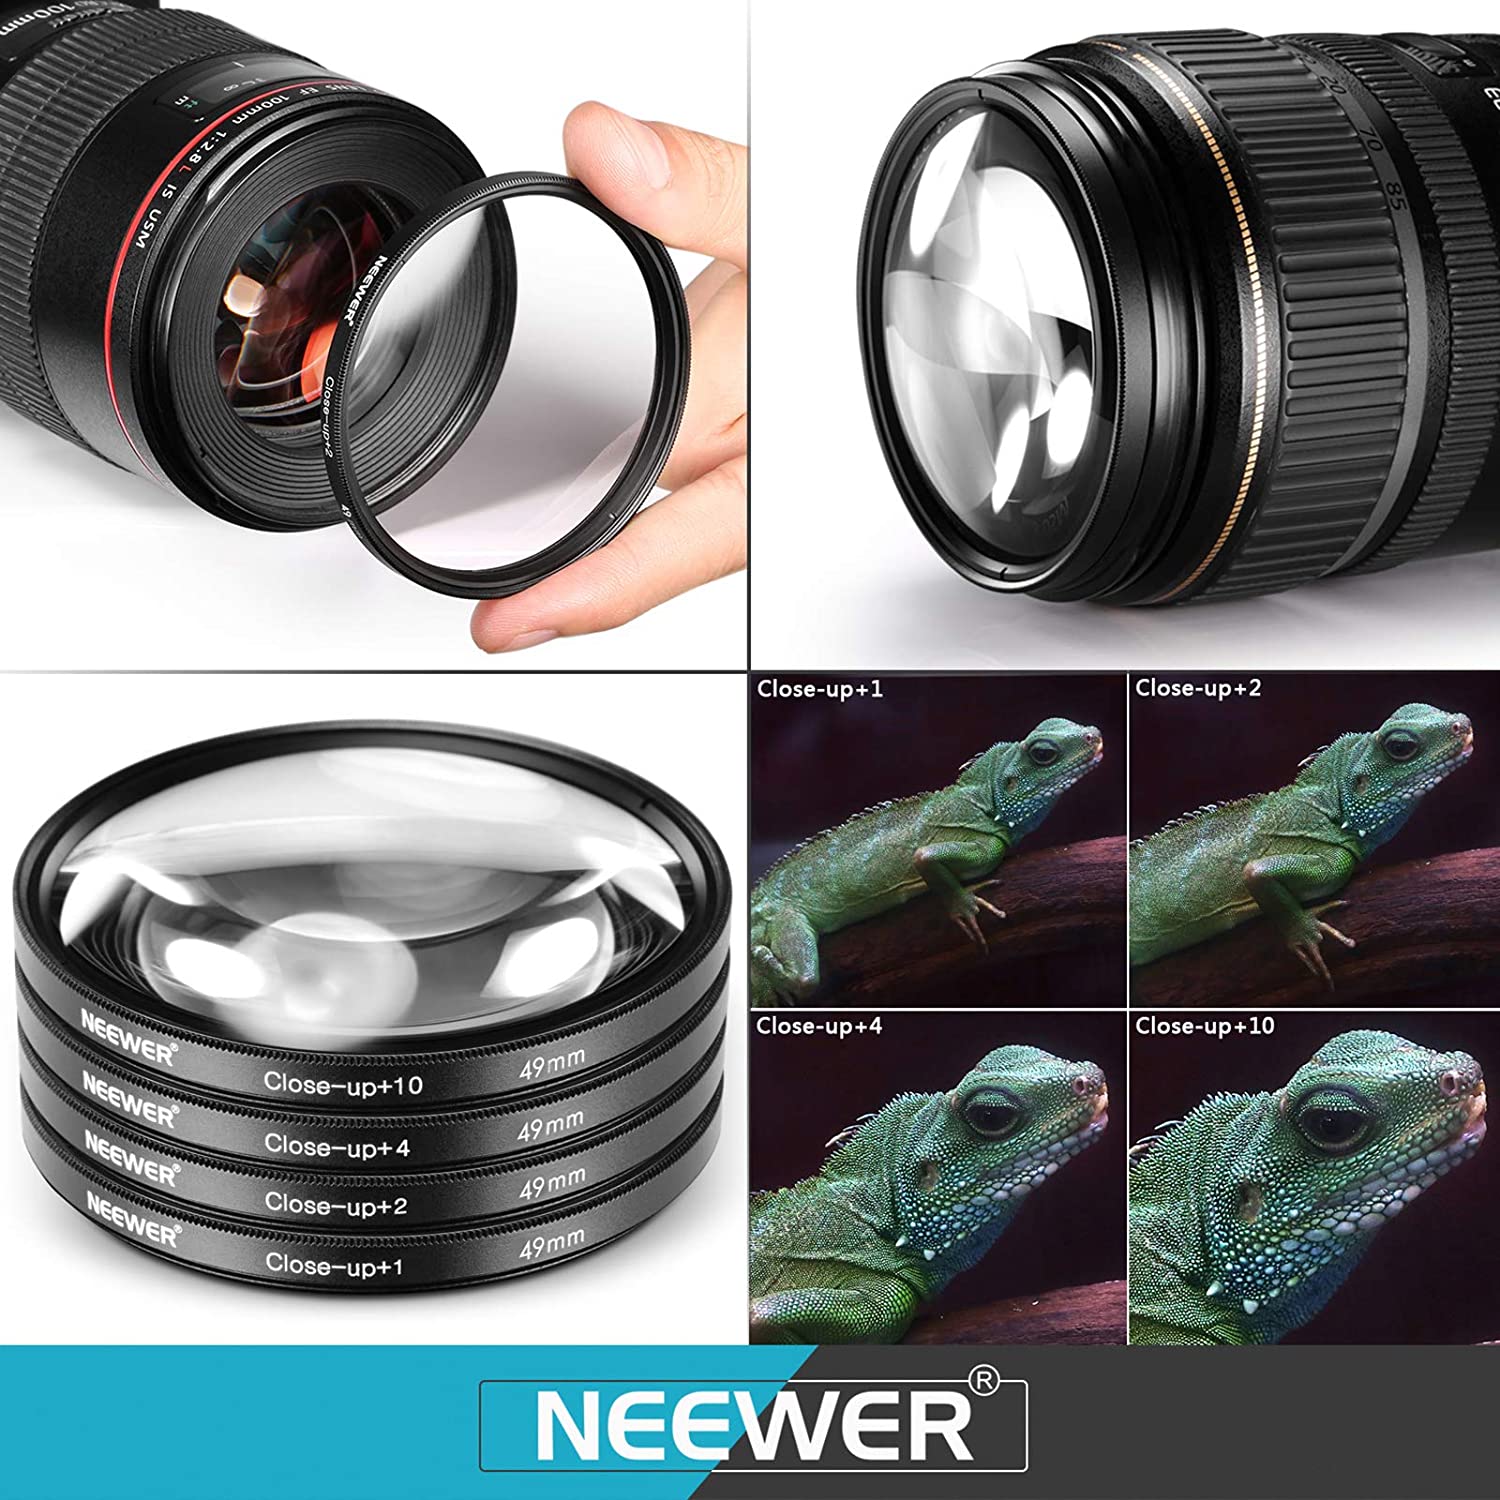 ND2, ND4, ND8 Neewer 49MM Professional UV CPL FLD Lens Filter and ND Neutral Density Filter Accessory Kit for Sony Alpha A3000 and NEX Series Cameras 